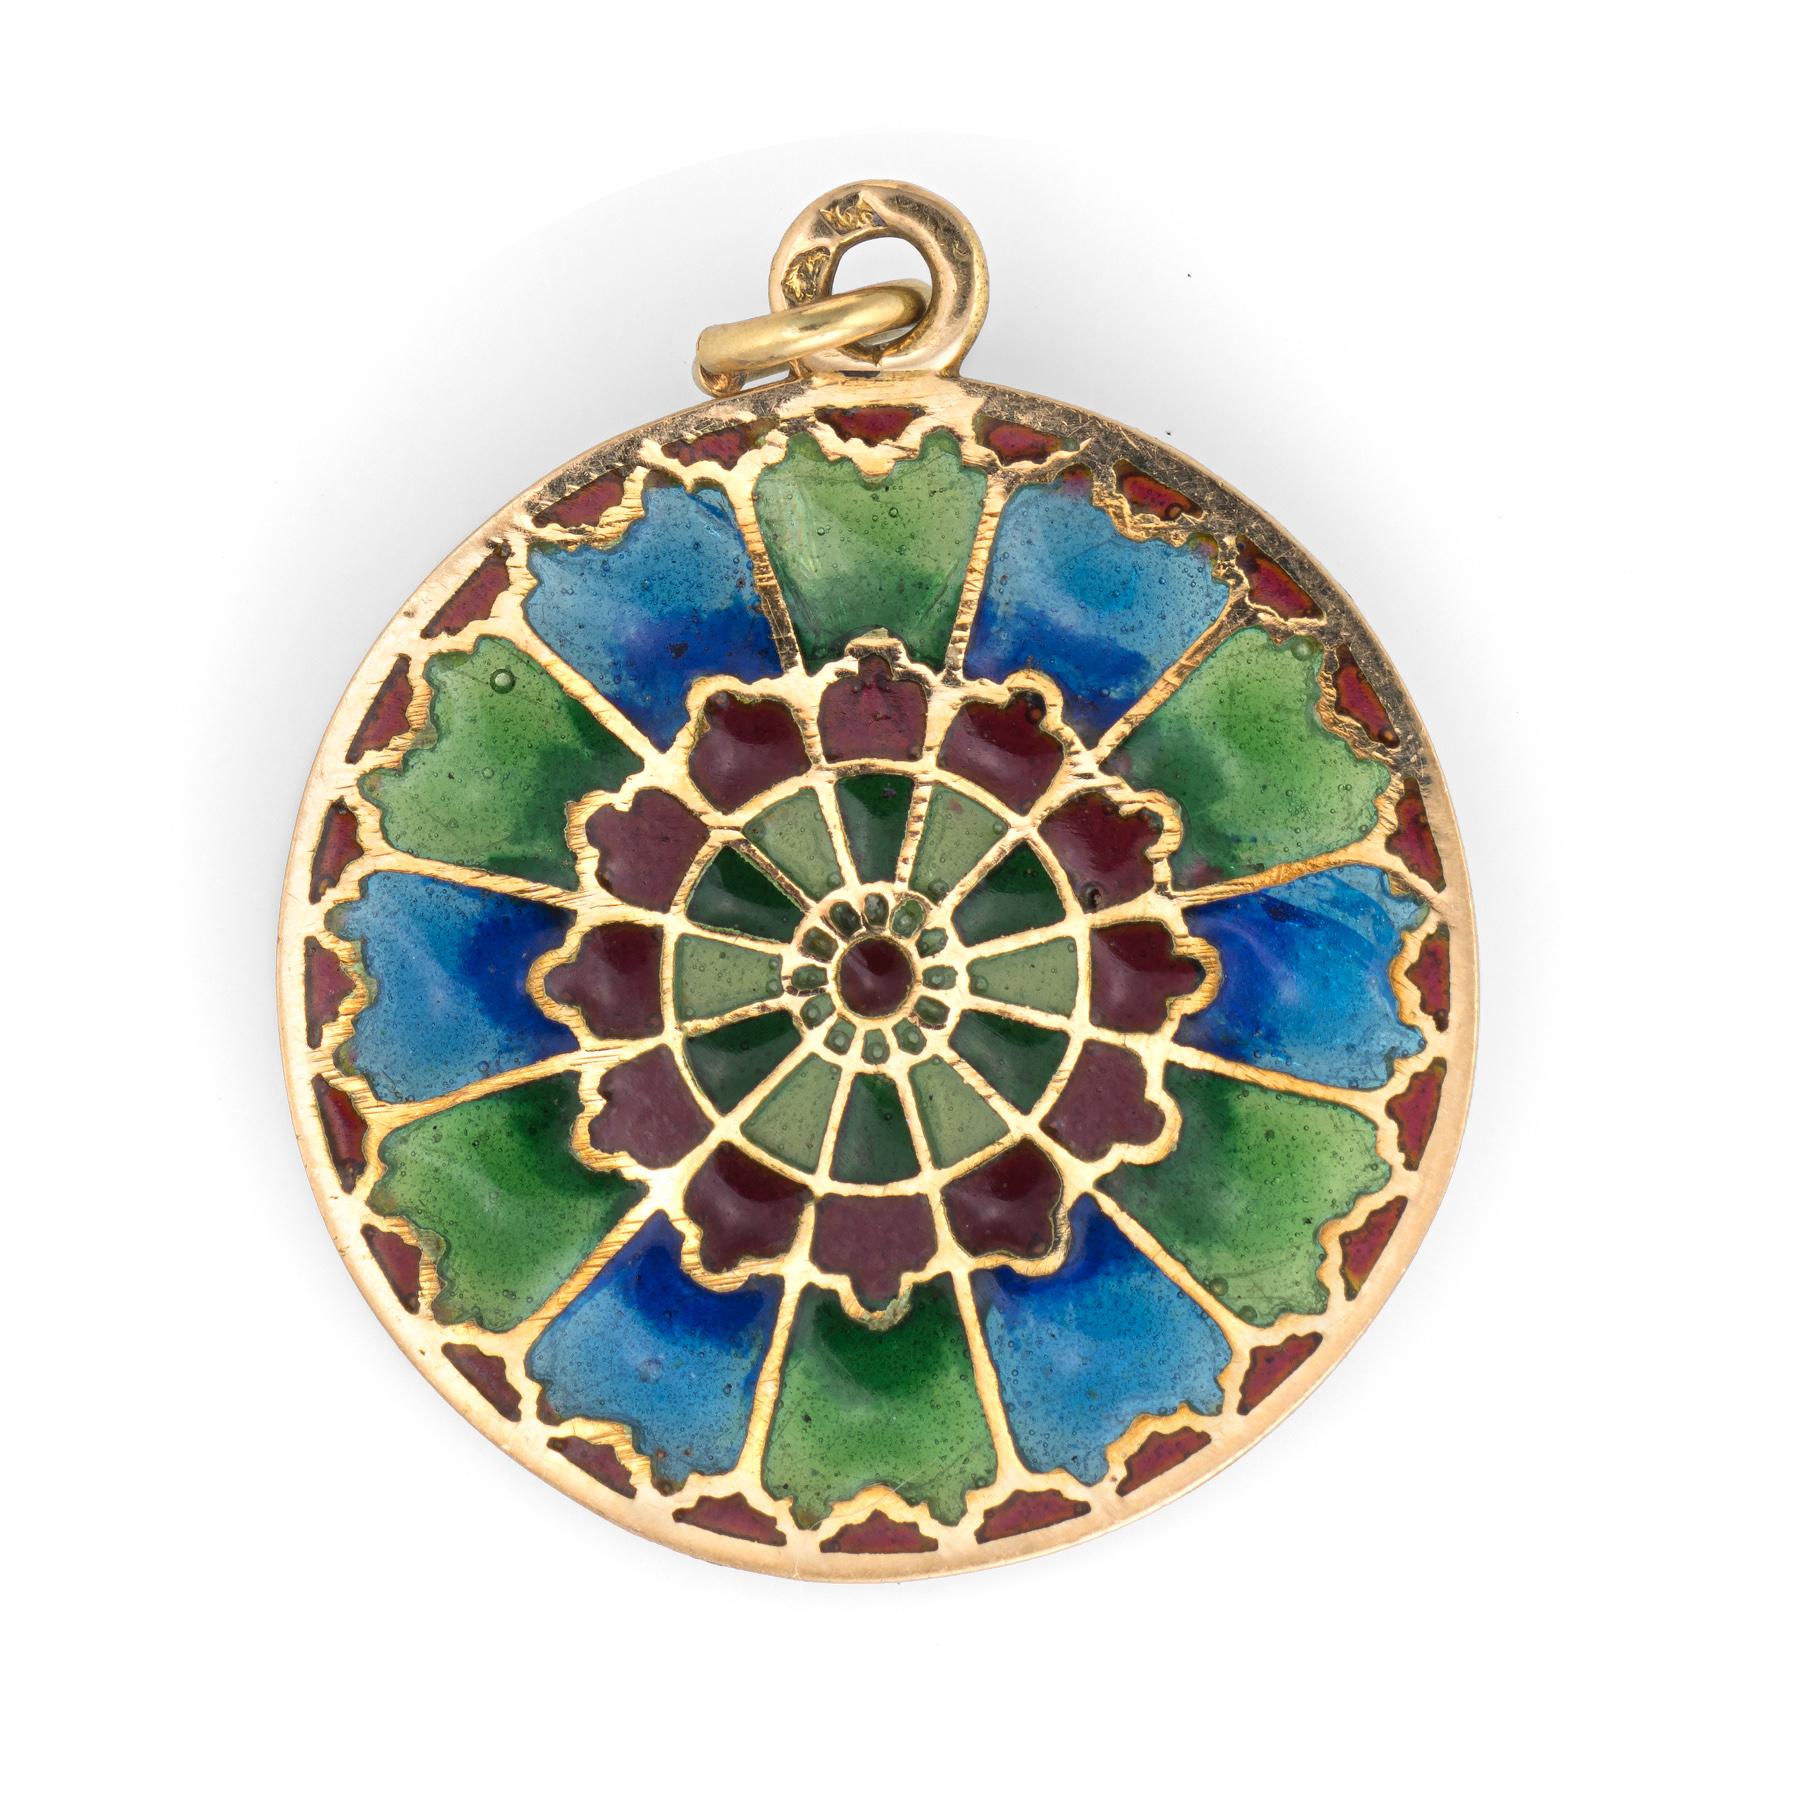 Finely detailed French plique a jour pendant (circa 1920s to 1930s), crafted in 18 karat yellow gold. 

A kaleidoscope of colors adorn the pendant in shades of red, blue and green.
 
Plique a jour is a French term for 'letting in daylight'. The